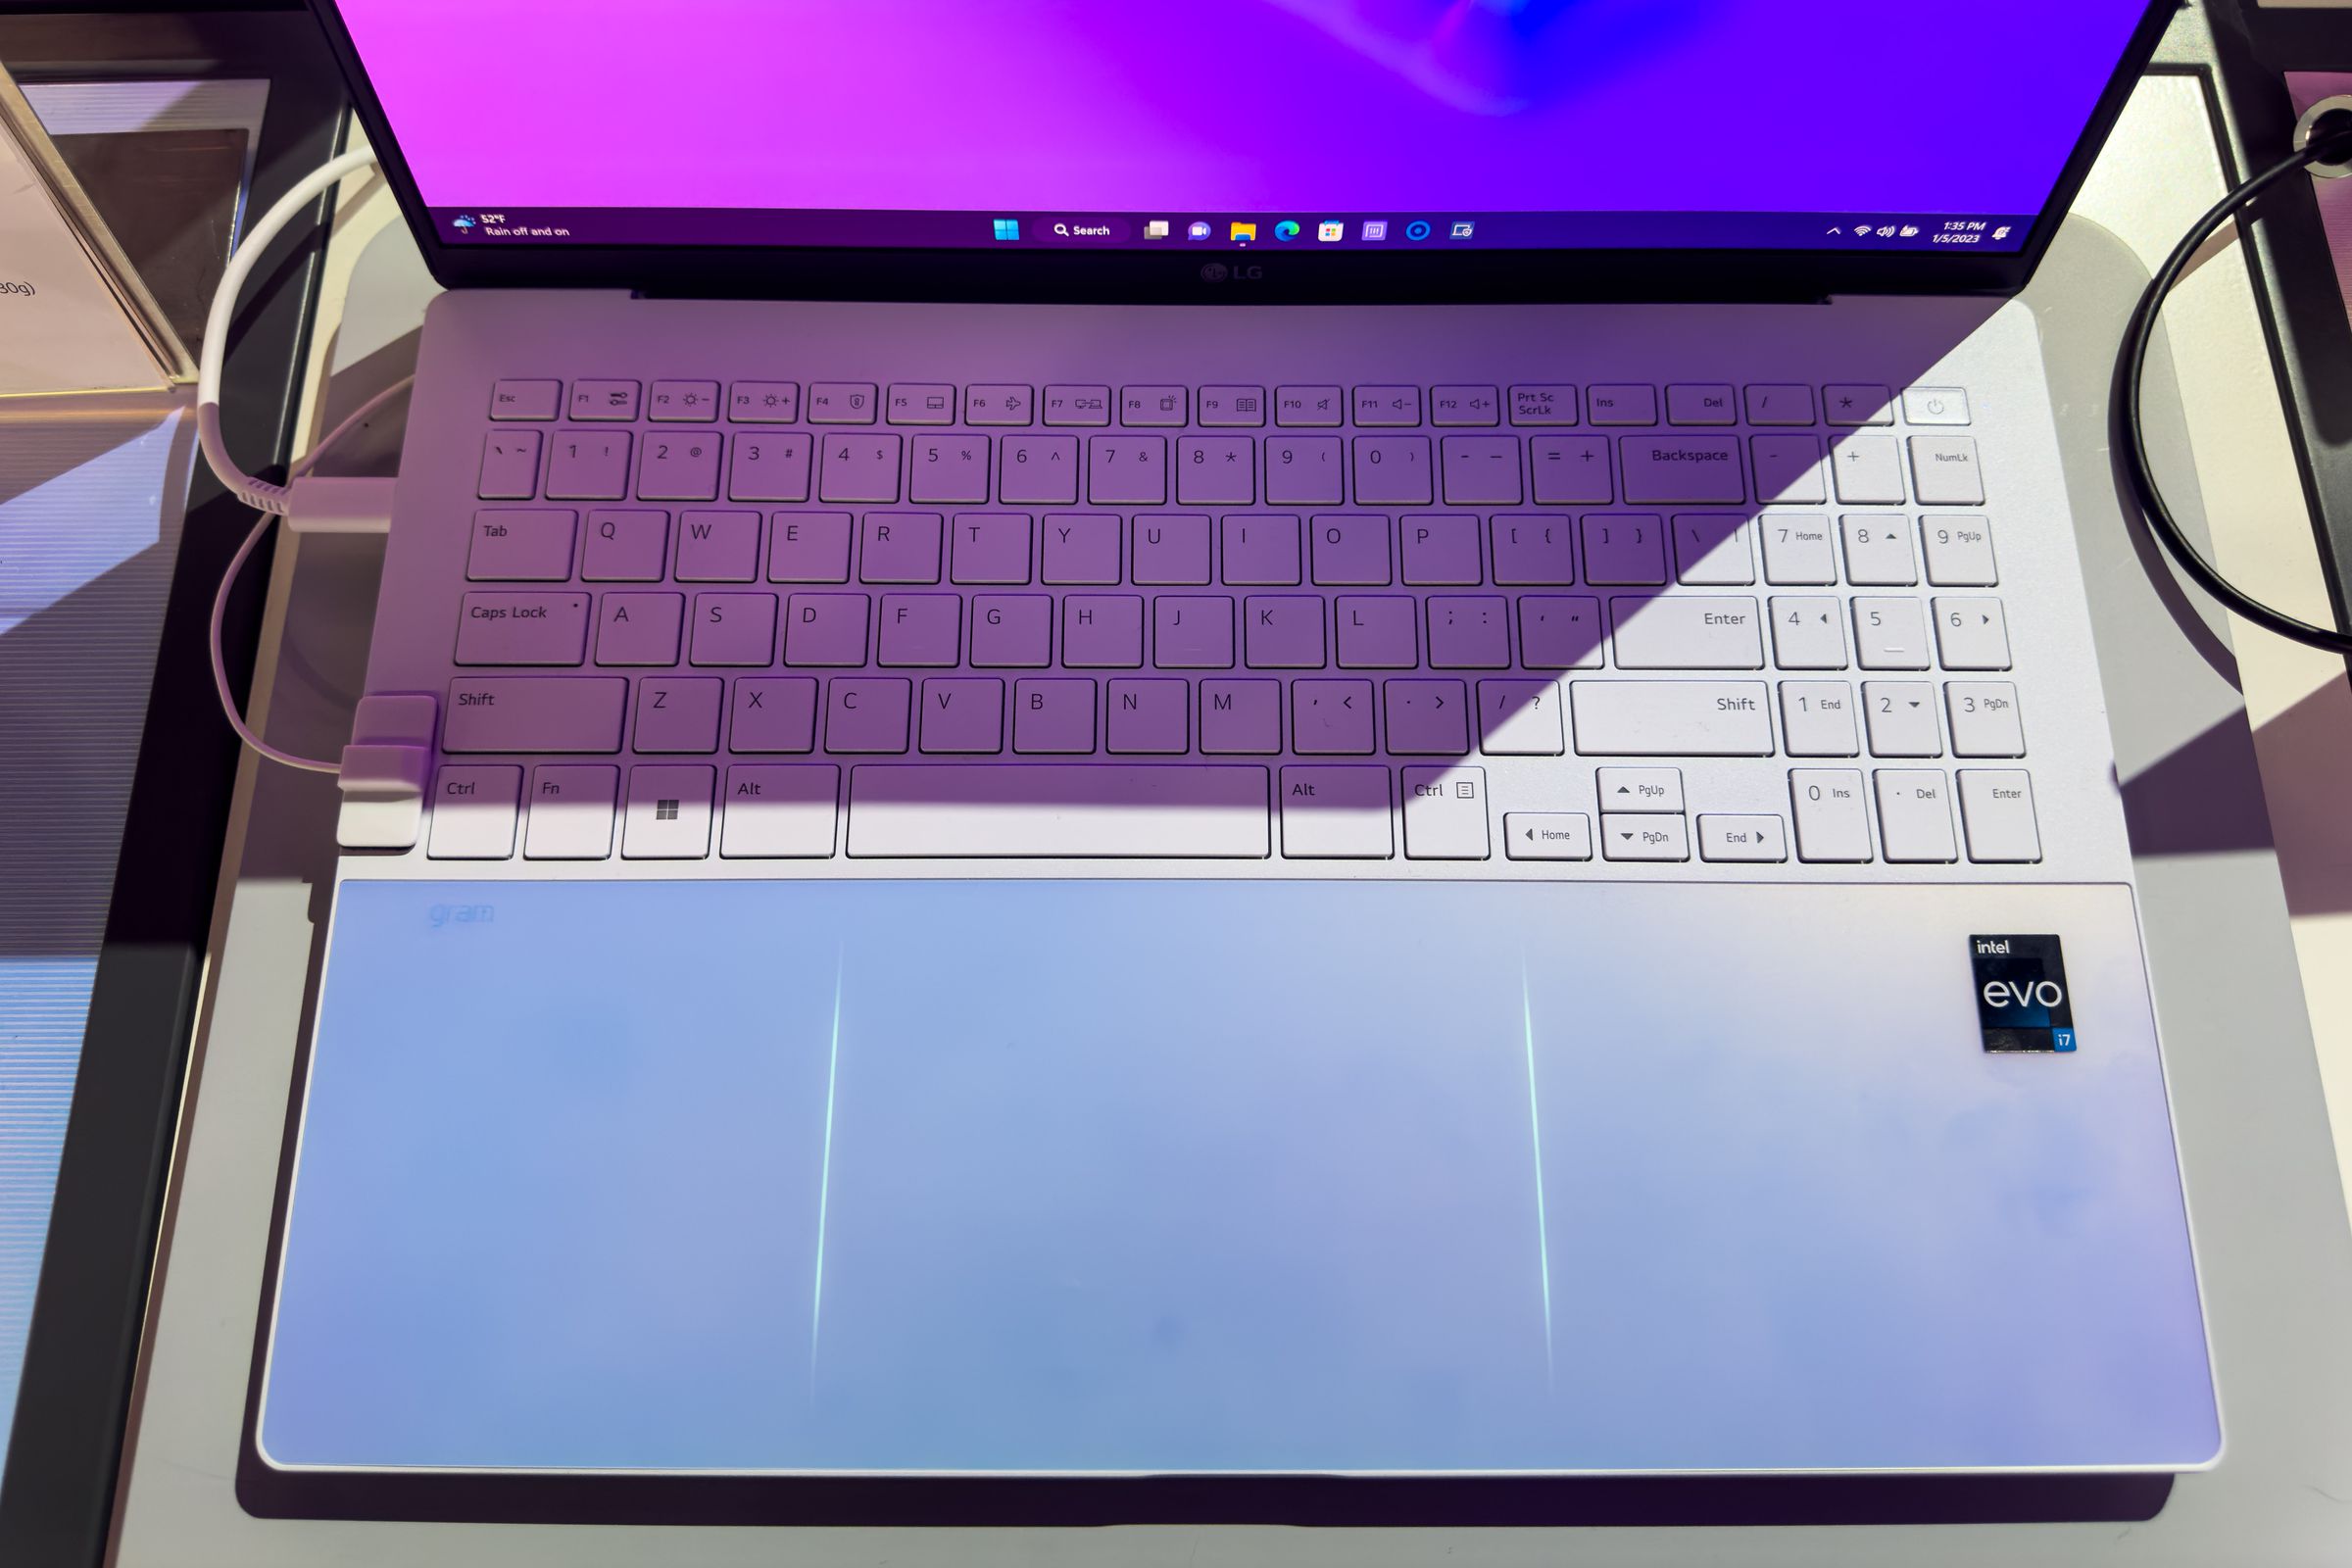 The LG Gram Style keyboard is seen from above with the touchpad LEDs backlit.